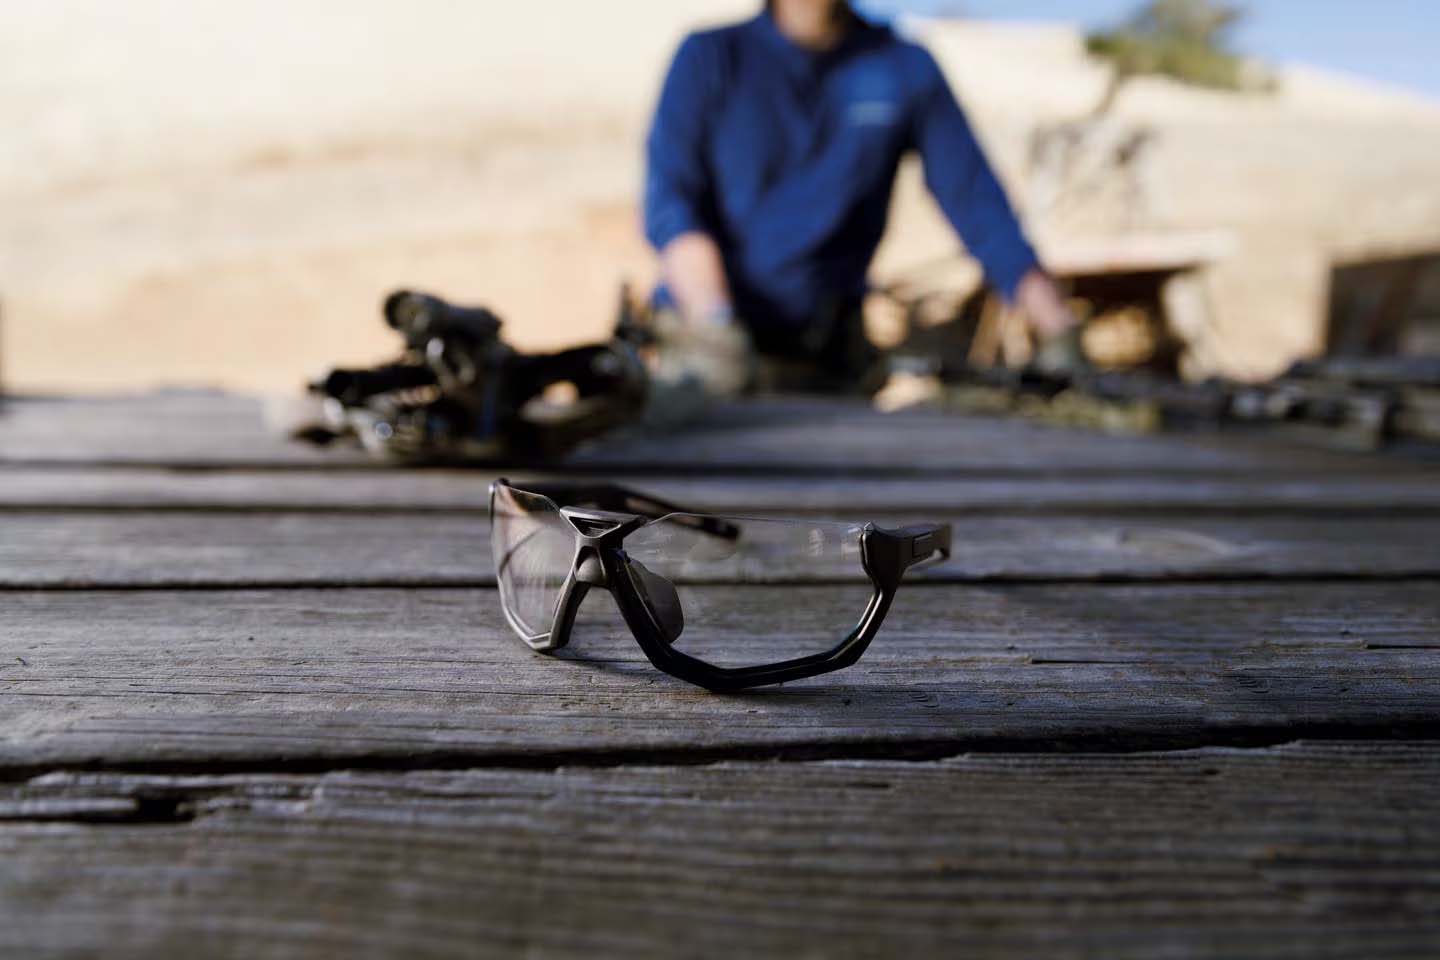 New eyewear design gives users a tactical advantage